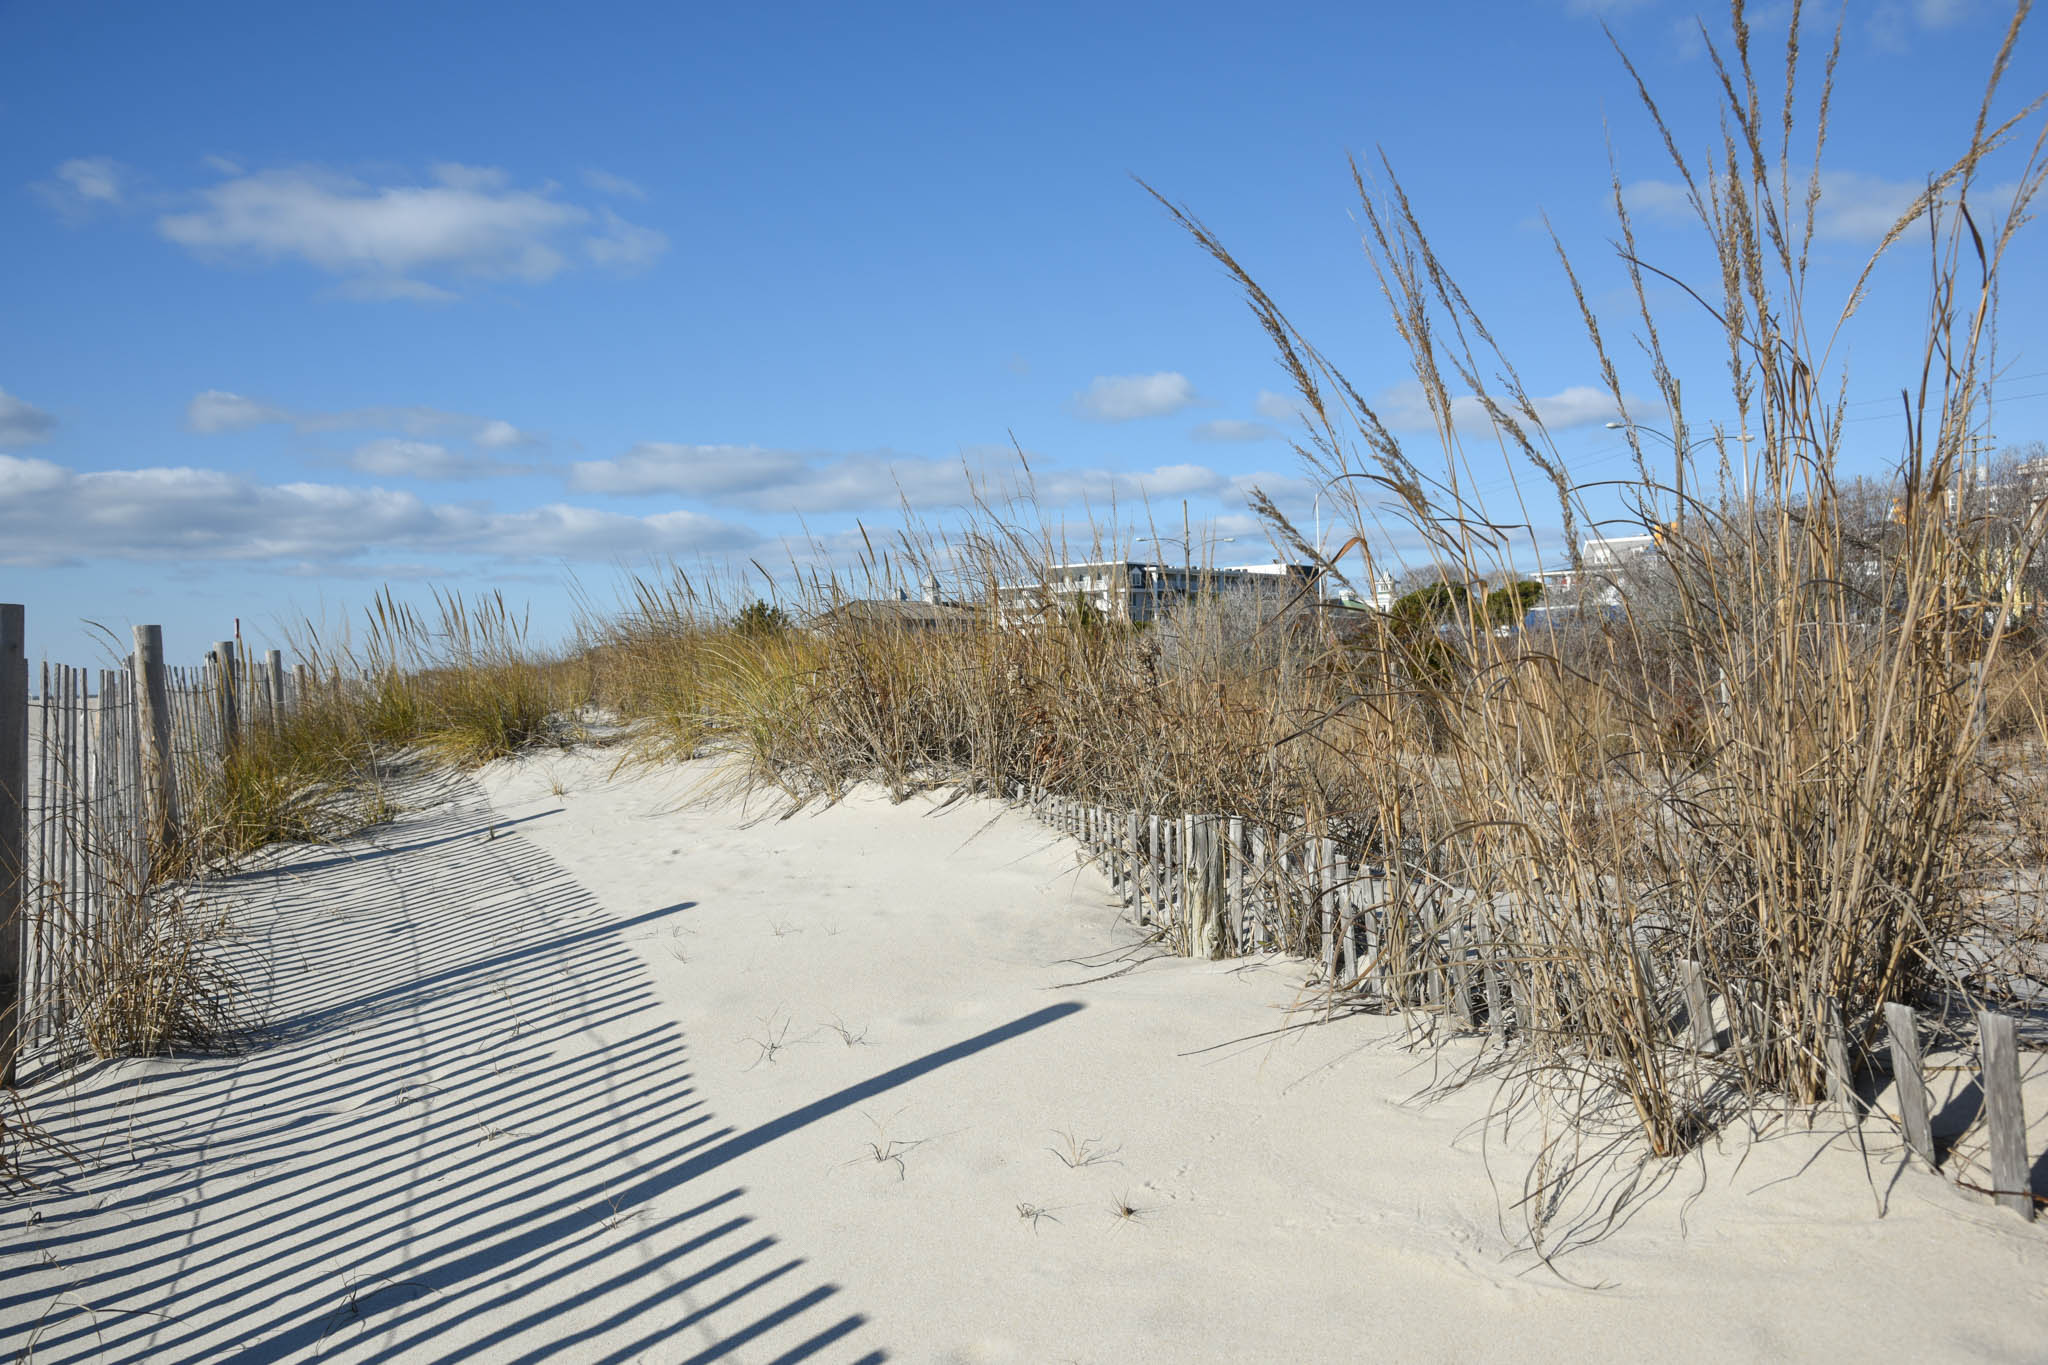 Dunes in the winter in Cape May